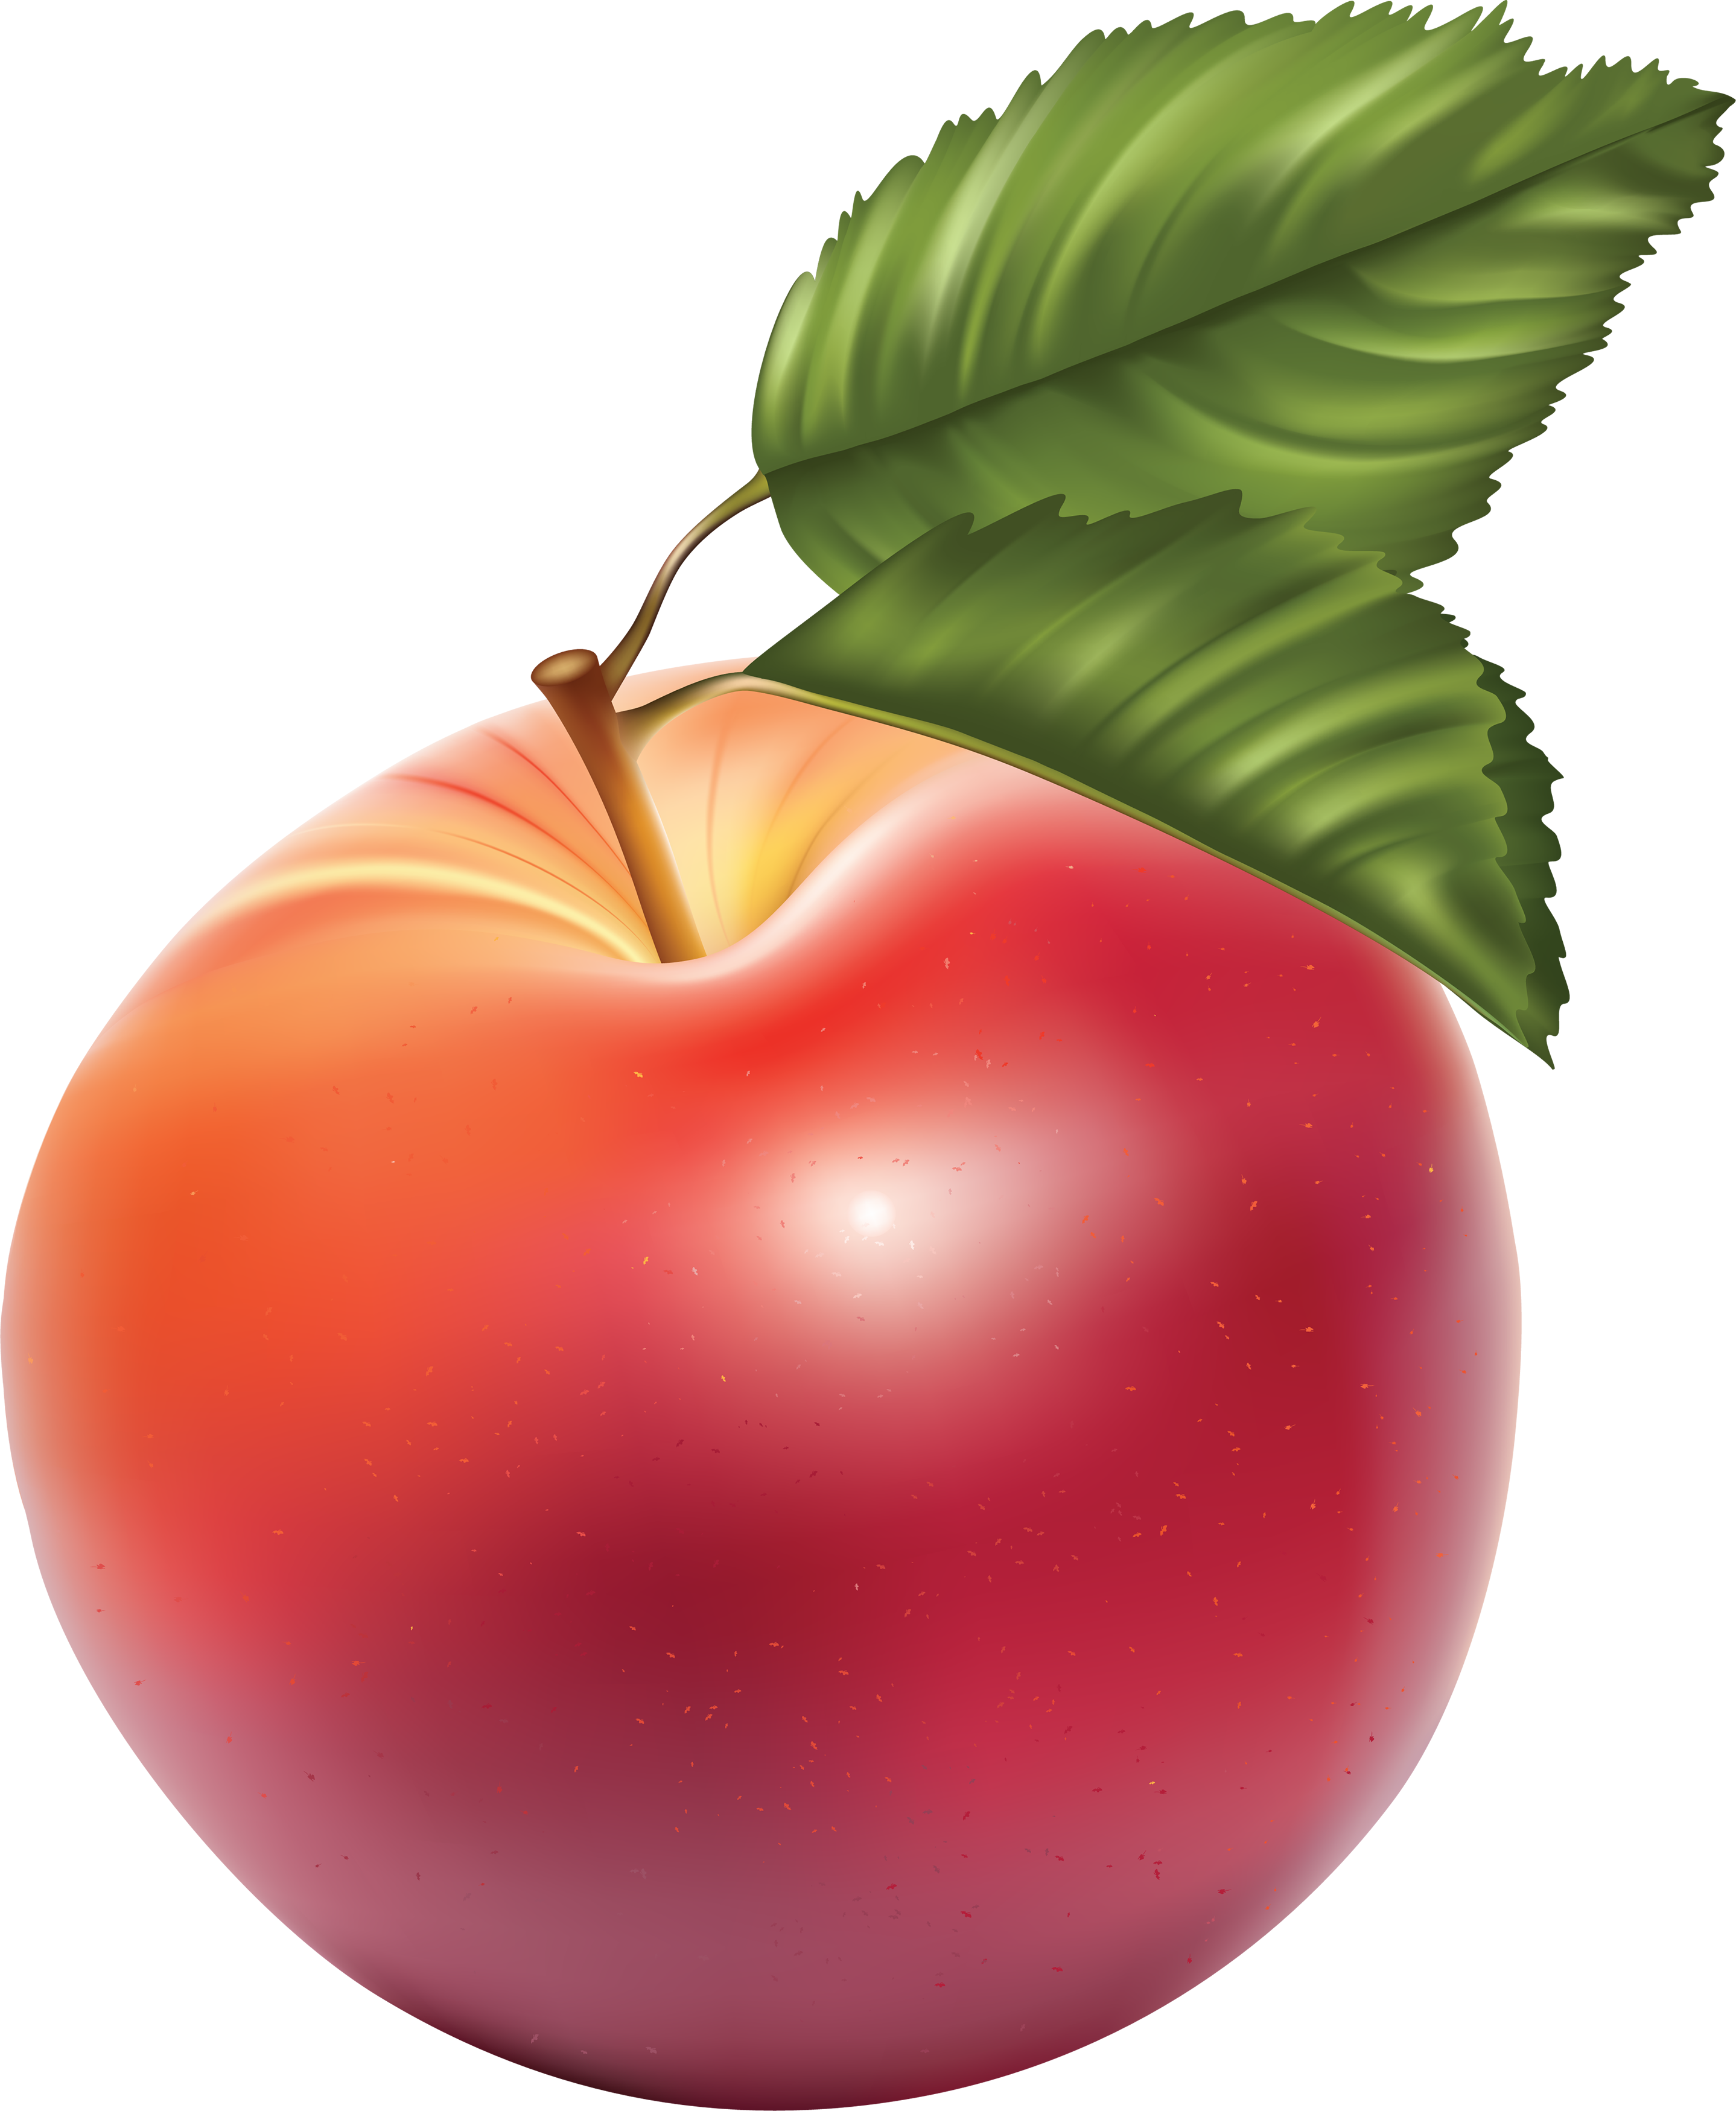 Red Apple PNG Image for Free Download